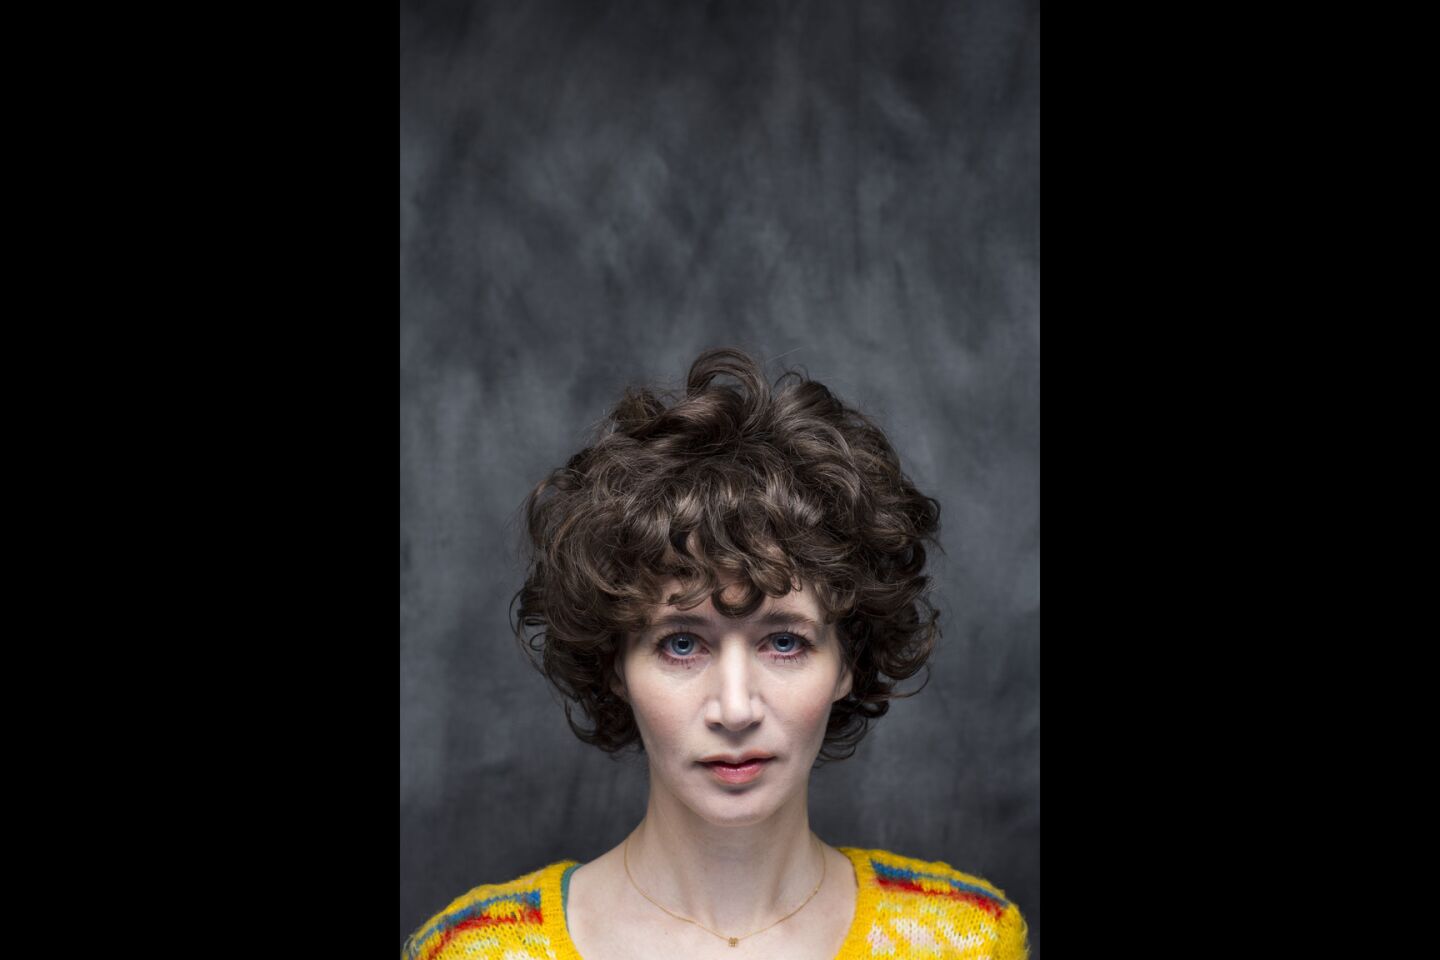 Actress Miranda July, from the film "Madeline's Madeline."